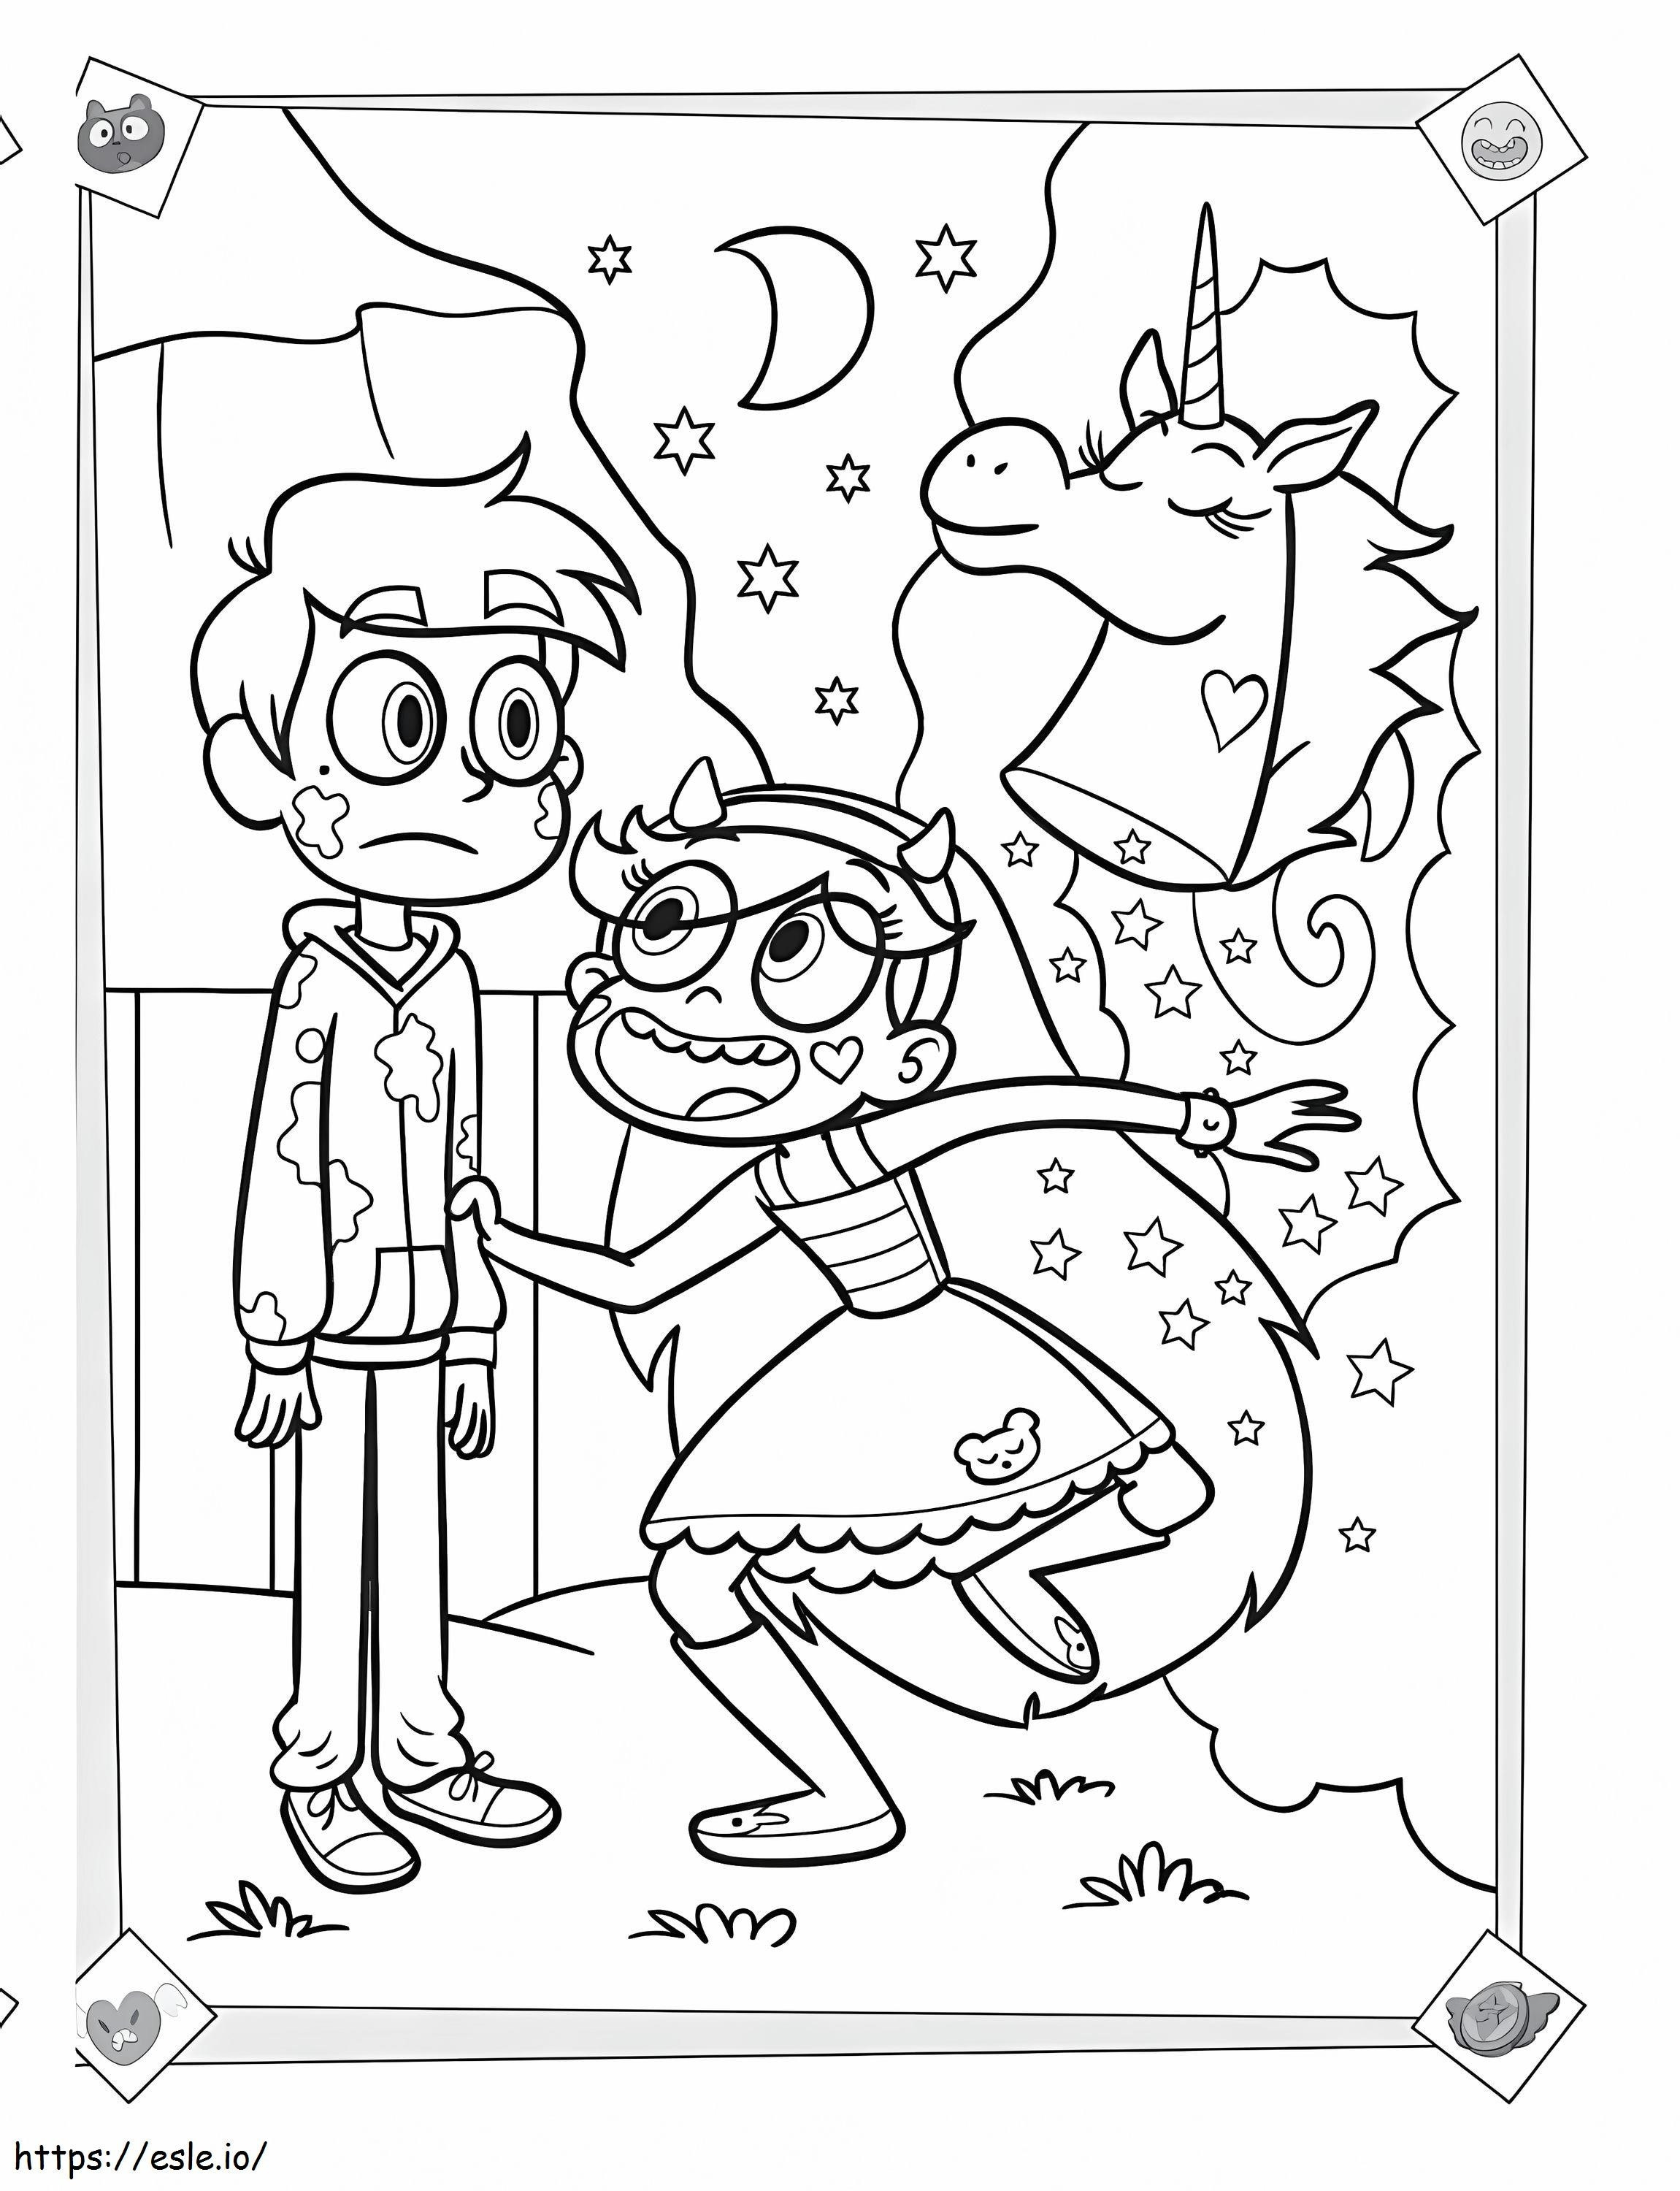 Star Marco And Pony Head coloring page